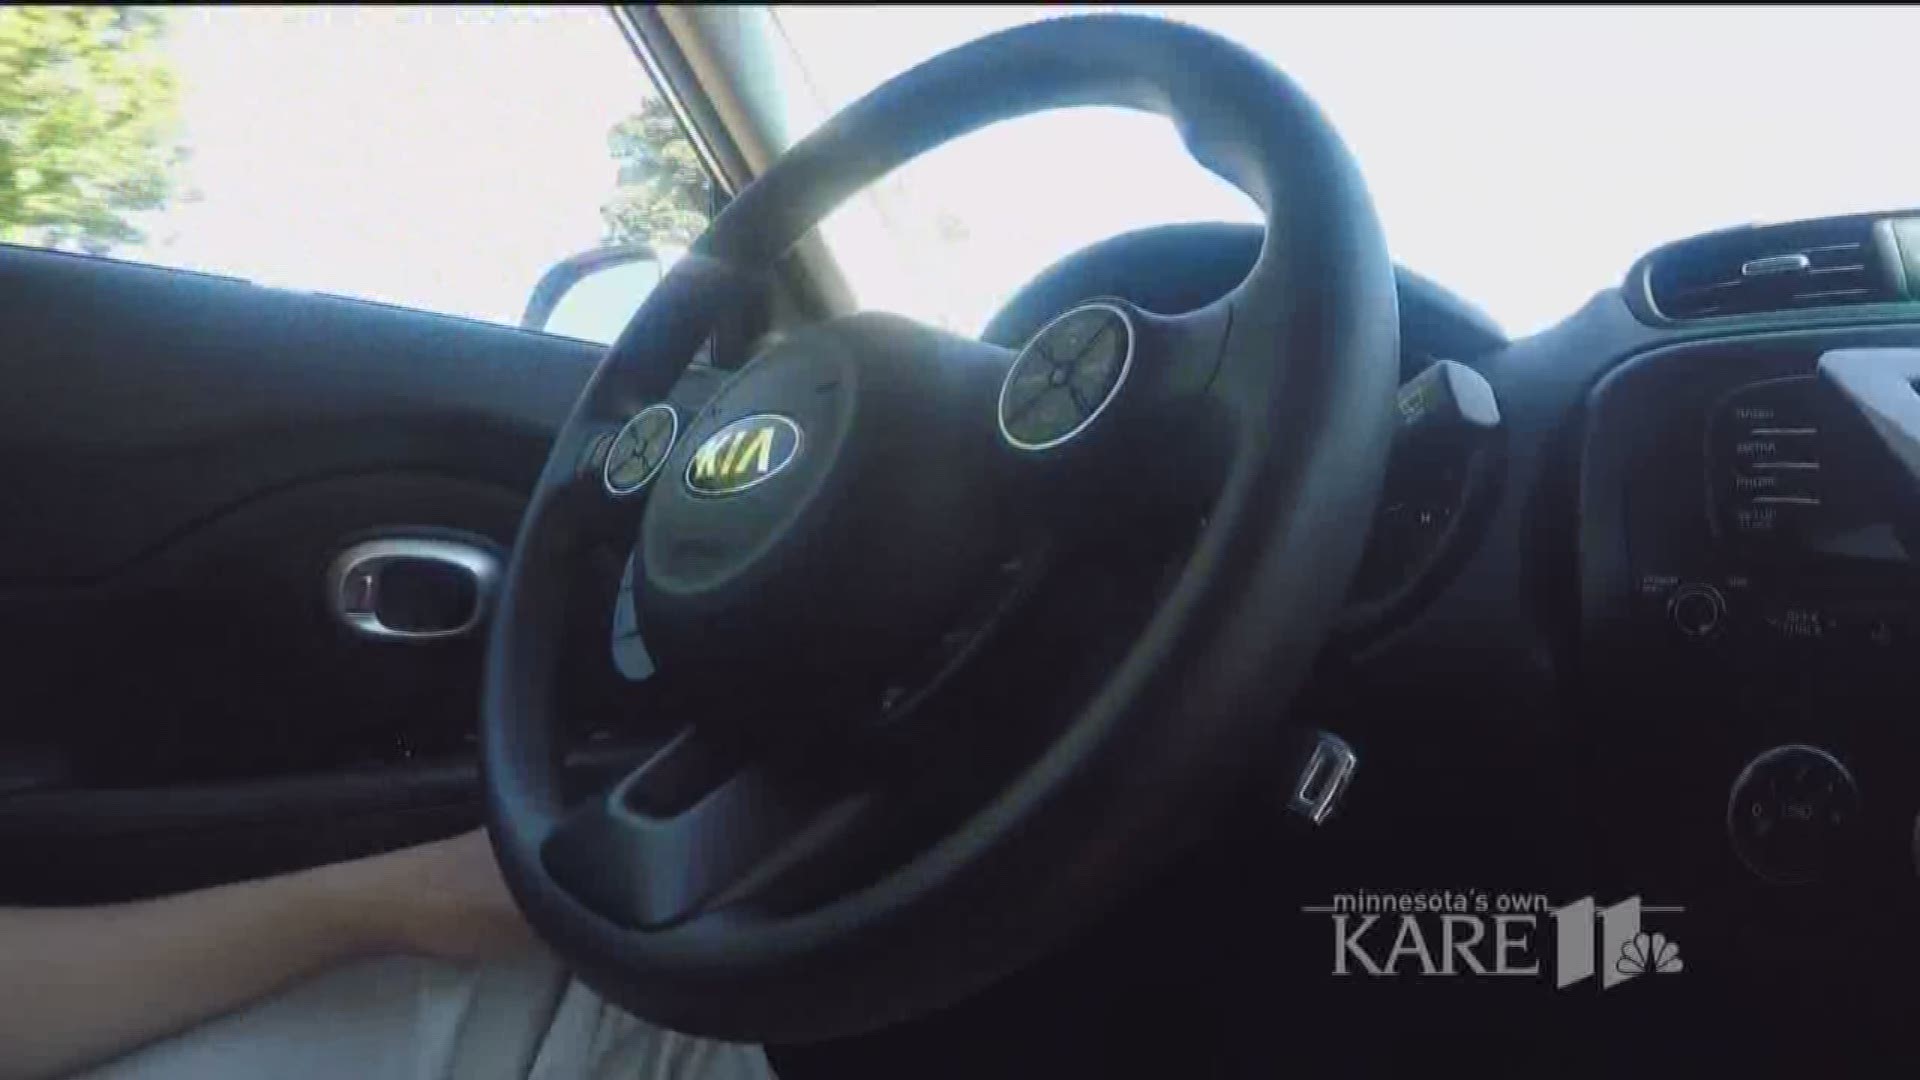 ou're driving down the highway. You take your foot off the gas and your hands off the wheel. The car takes over control. If you think this is some futuristic dream, forget it. The technology is already here. http://kare11.tv/2xWjjQb